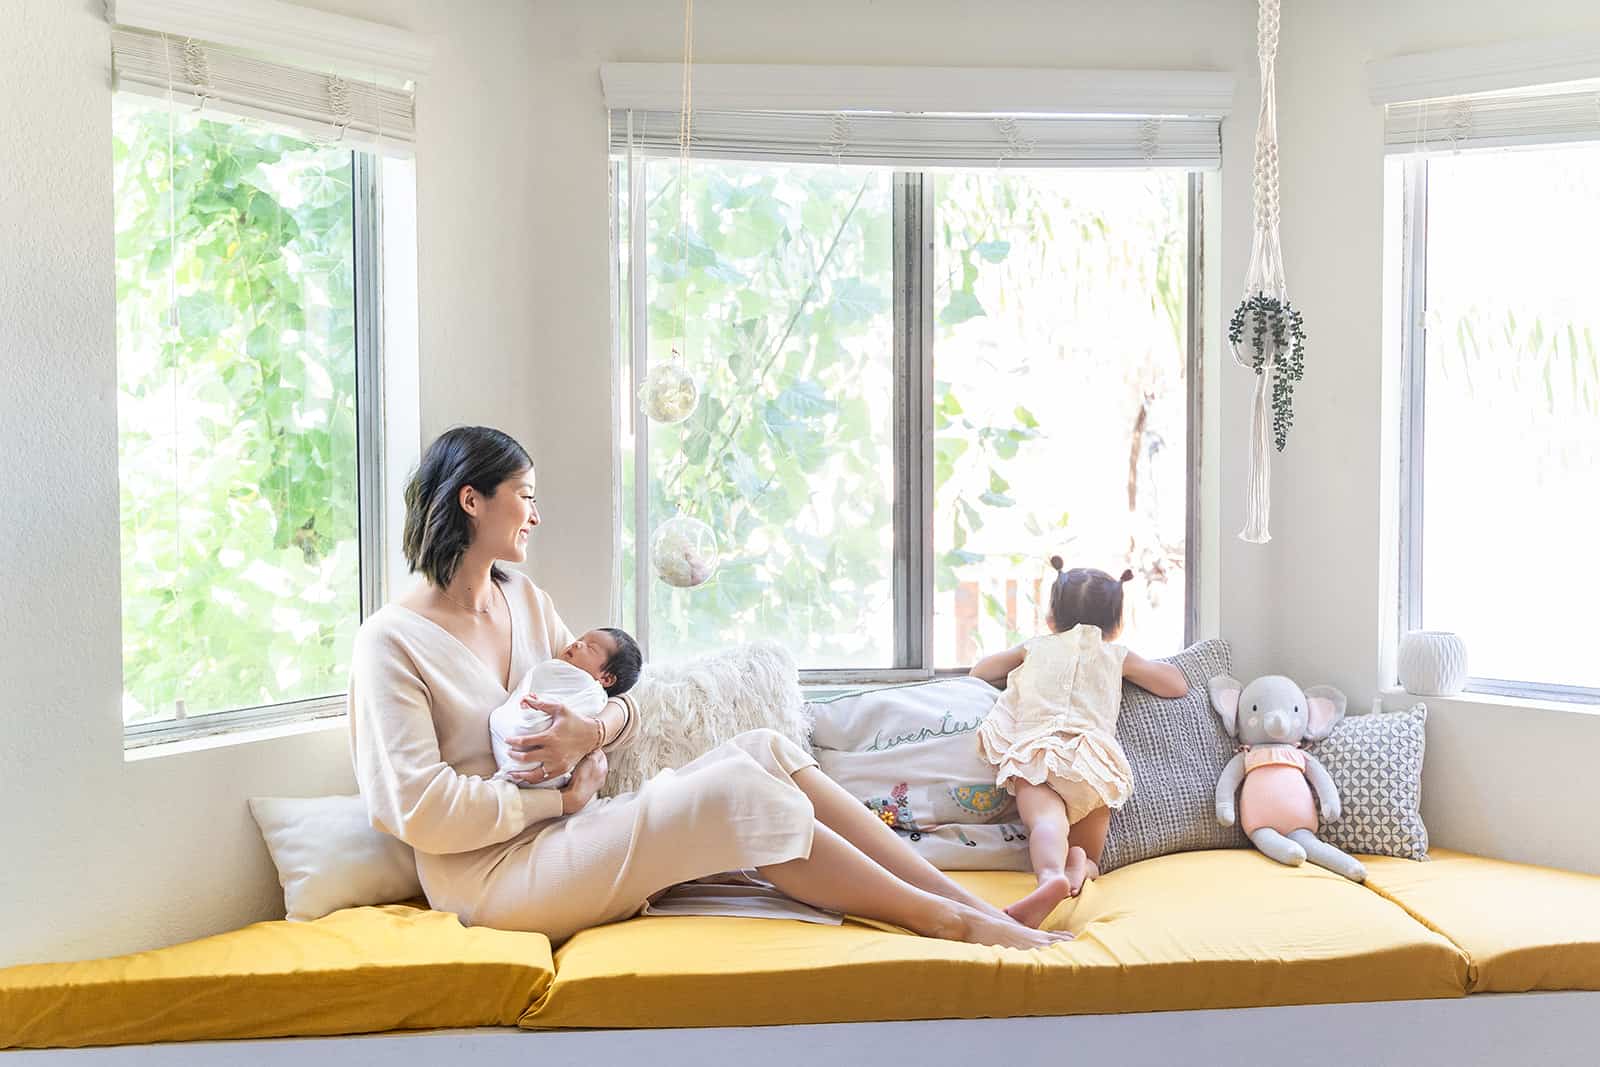 A mother sits along a bay window holding her sleeping newborn baby while her toddler daughter peeks out the window